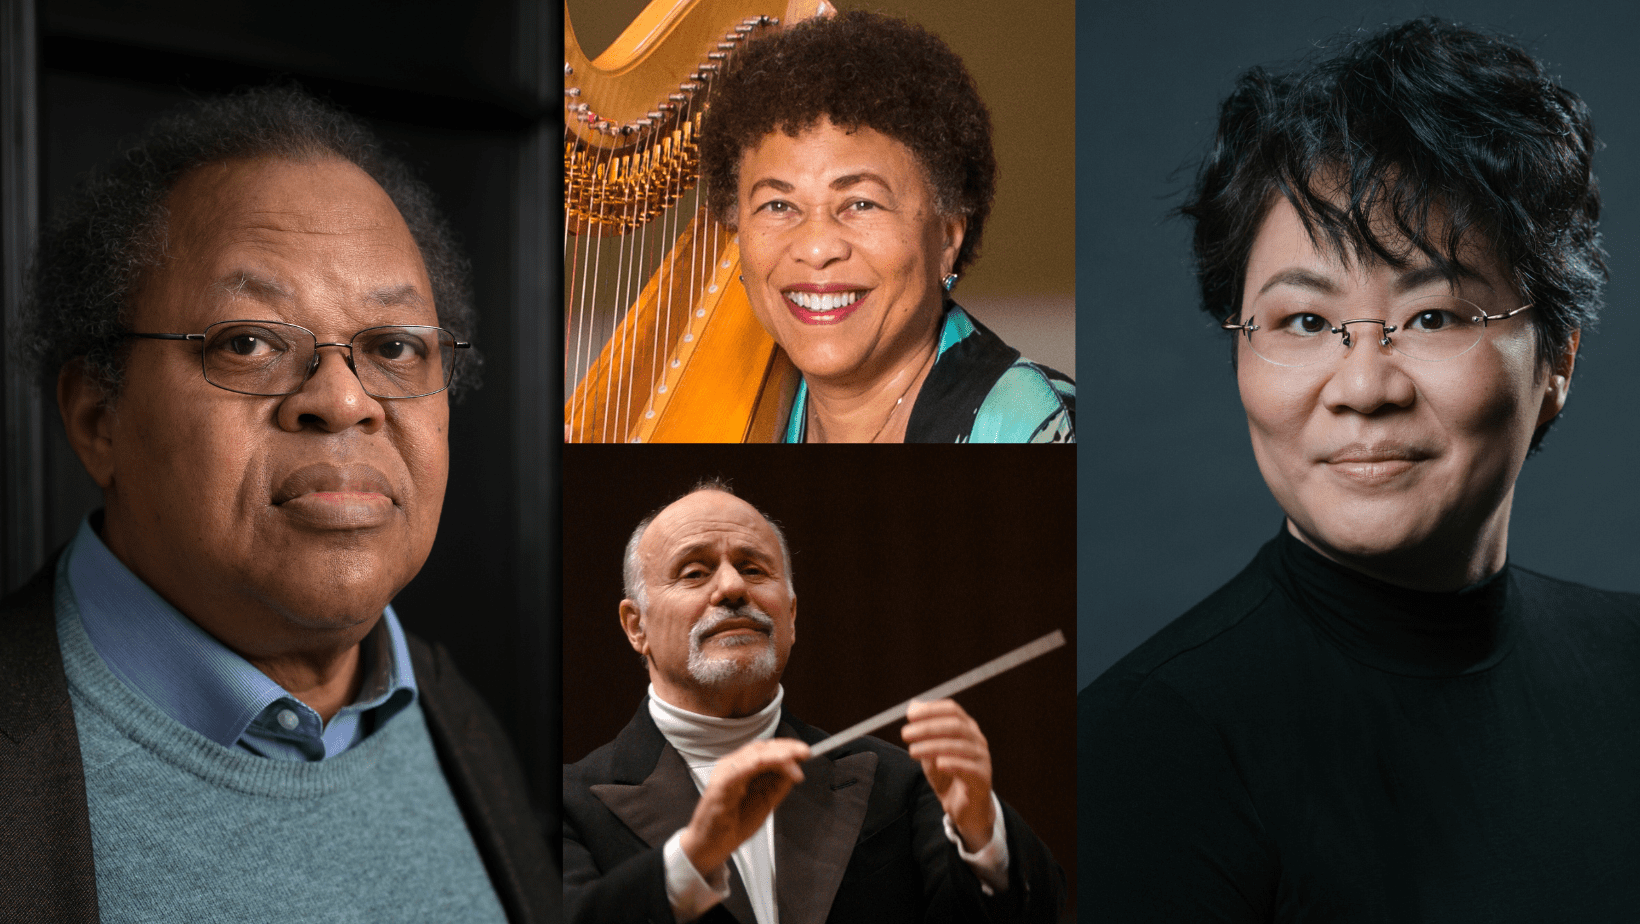 Meet Our 2023 Commencement Speaker and Honorary Degree Recipients